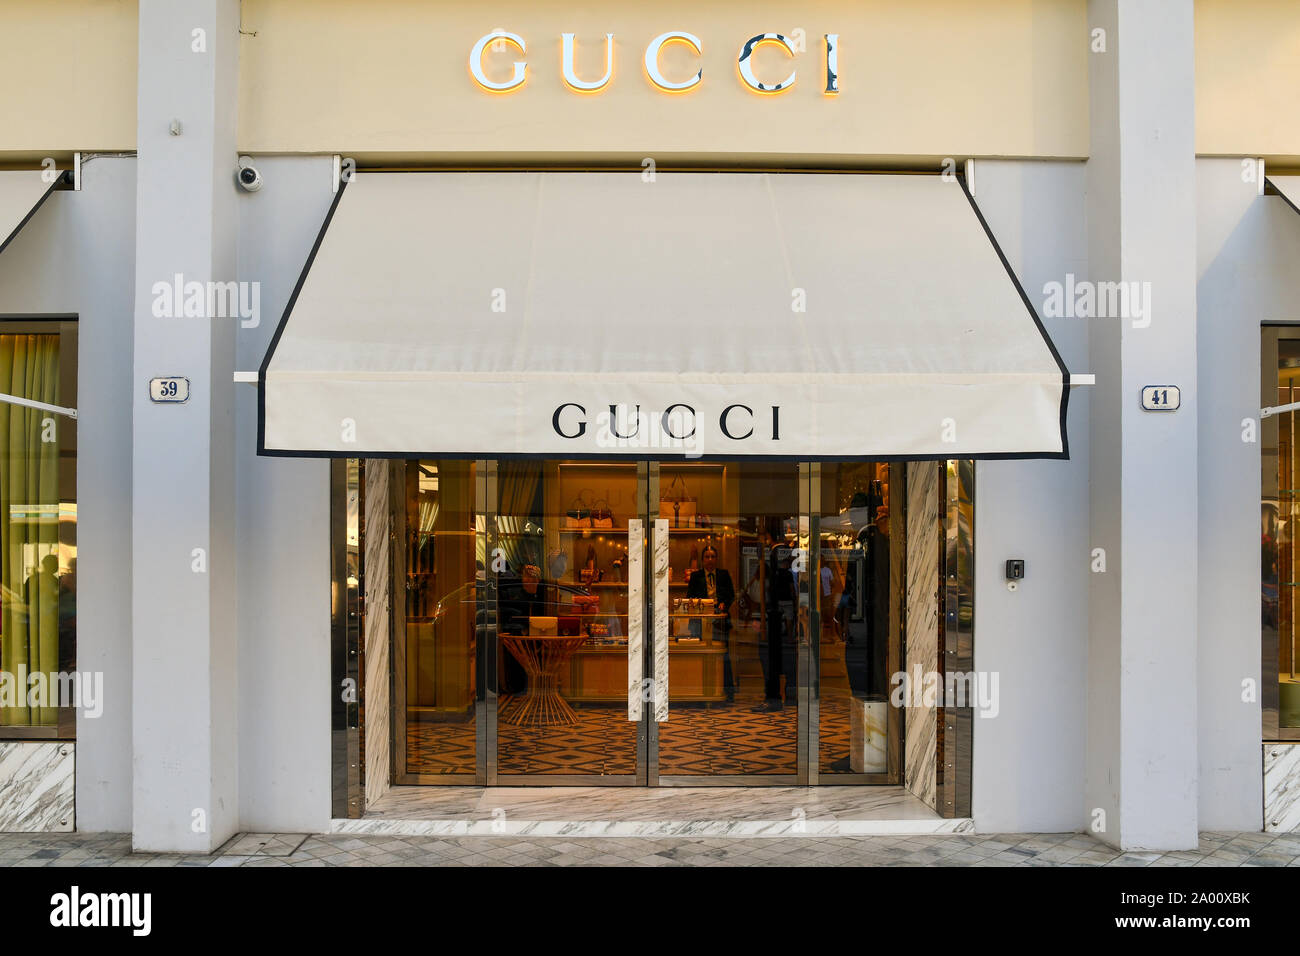 Gucci Logo High Resolution Stock Photography and Images - Alamy